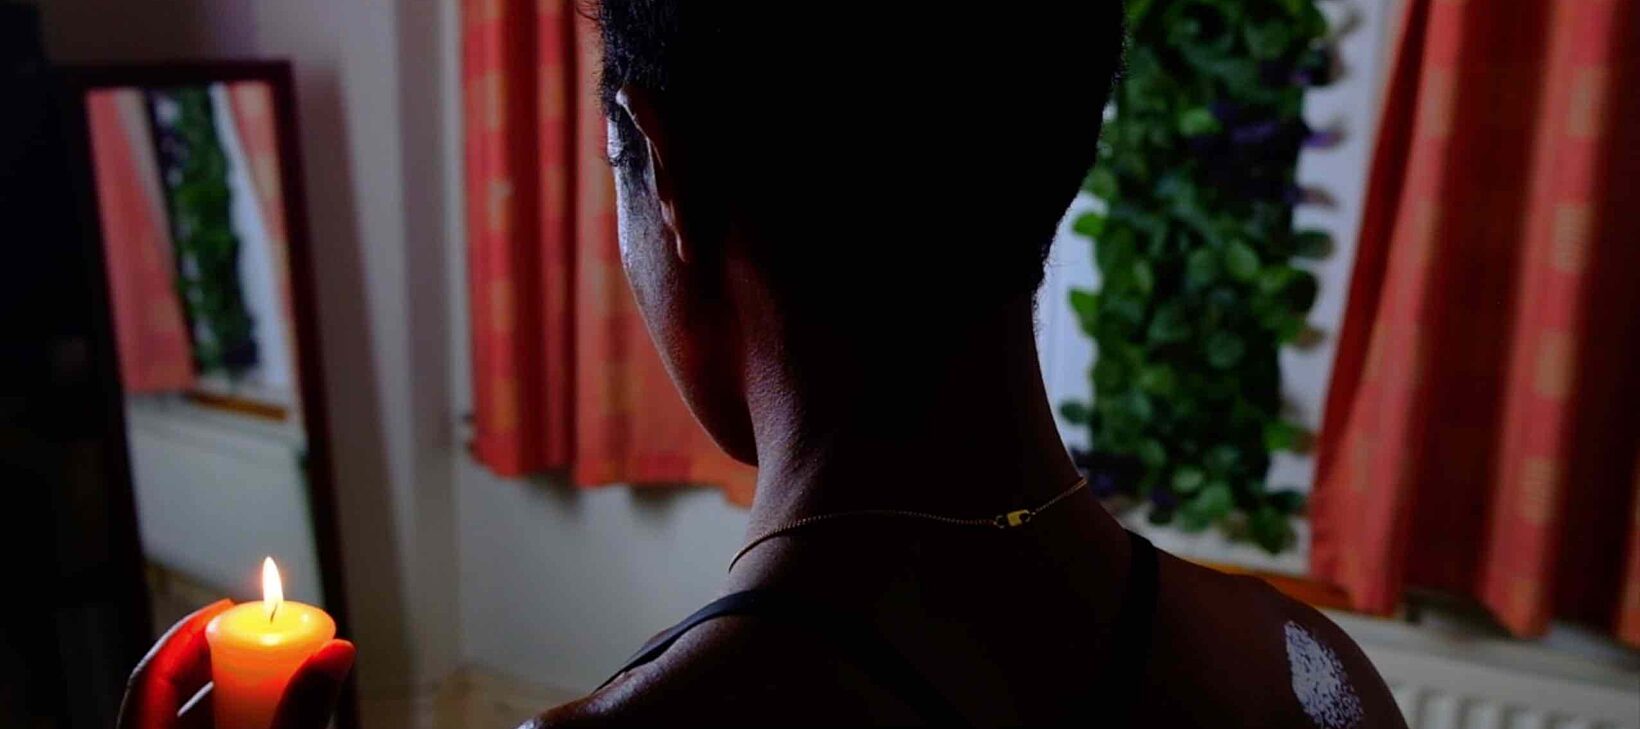 A film still showing a black person facing away from the camera and holding a lit candle. The subtitles read, "we are living through an upheaval."